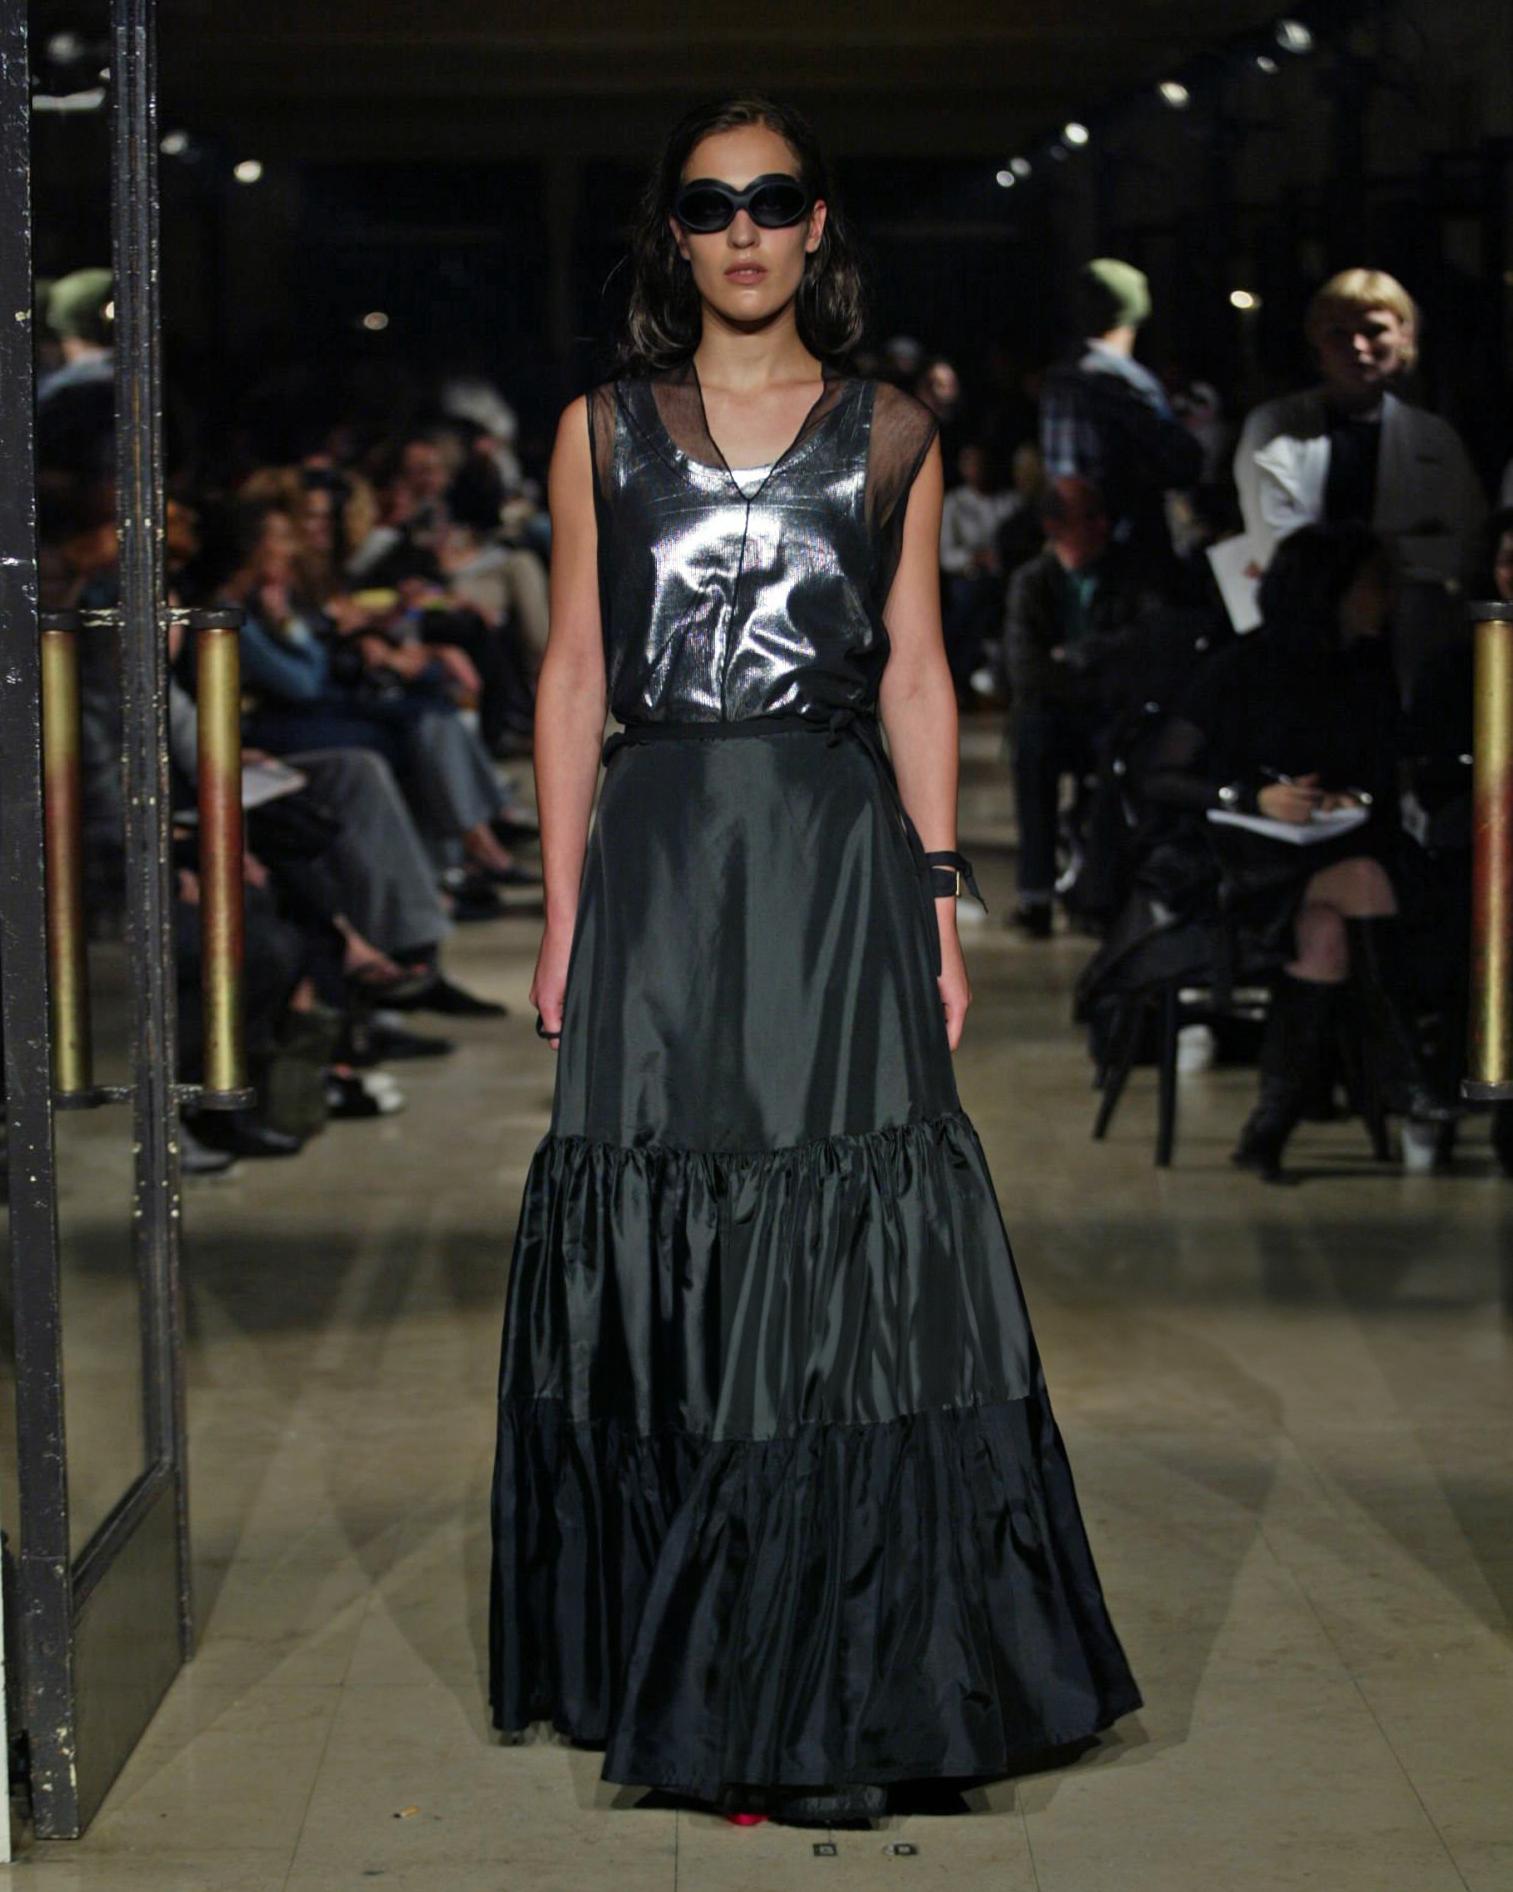 Women's Martin Margiela Artisanal Evening Dress Made Out Of Vintage Petticoats, ss 2003 For Sale